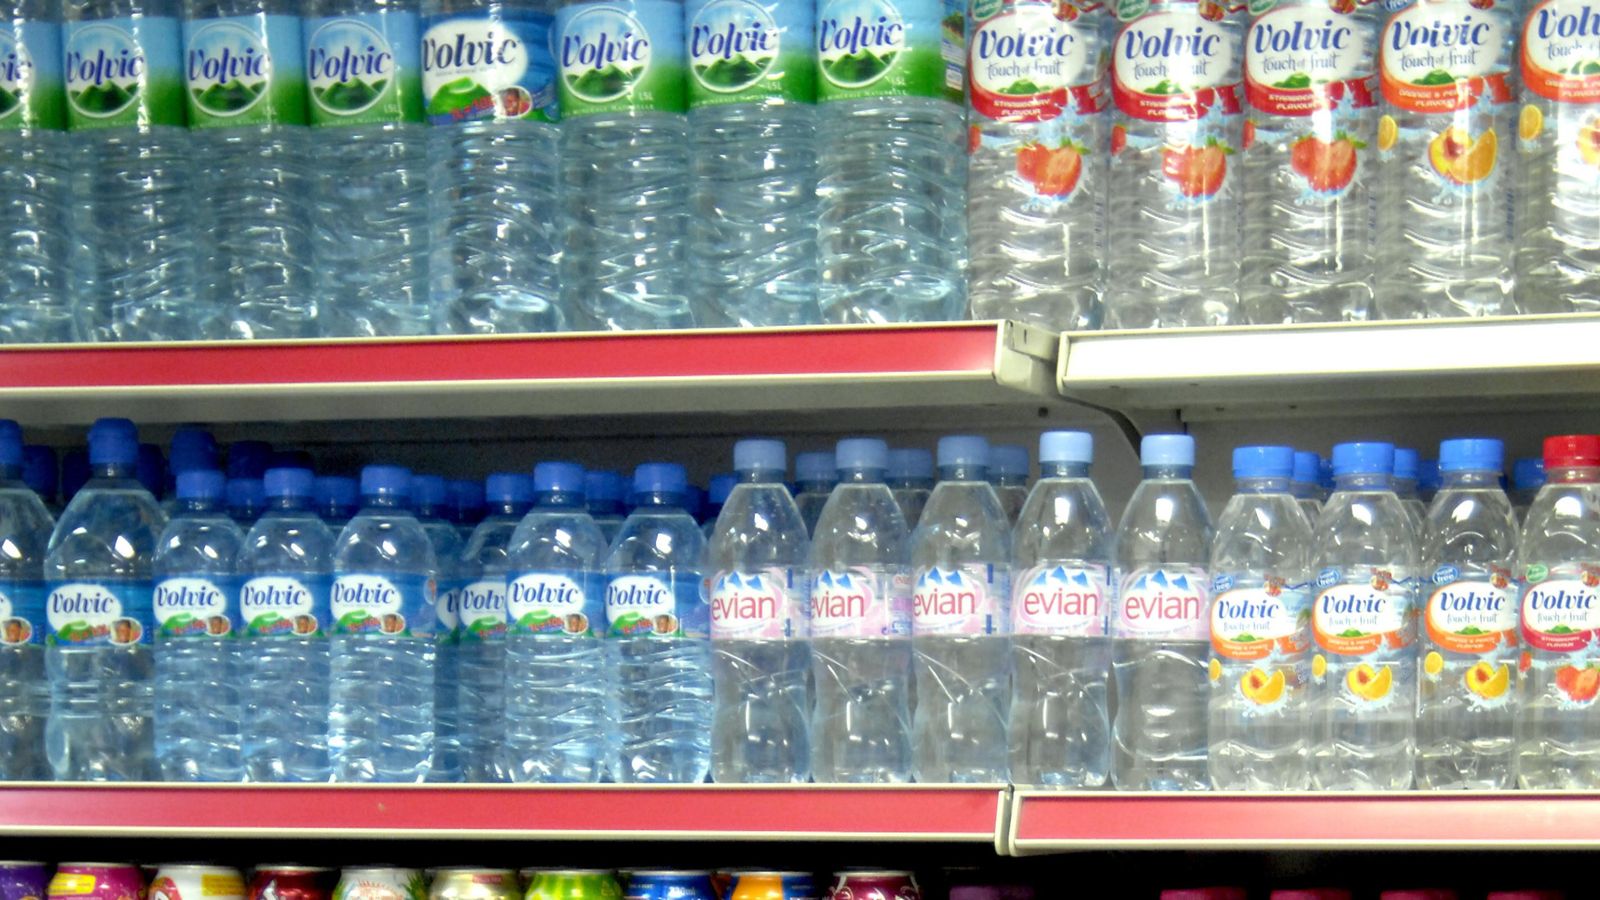 Deposit on drinks in plastic bottles considered to boost recycling